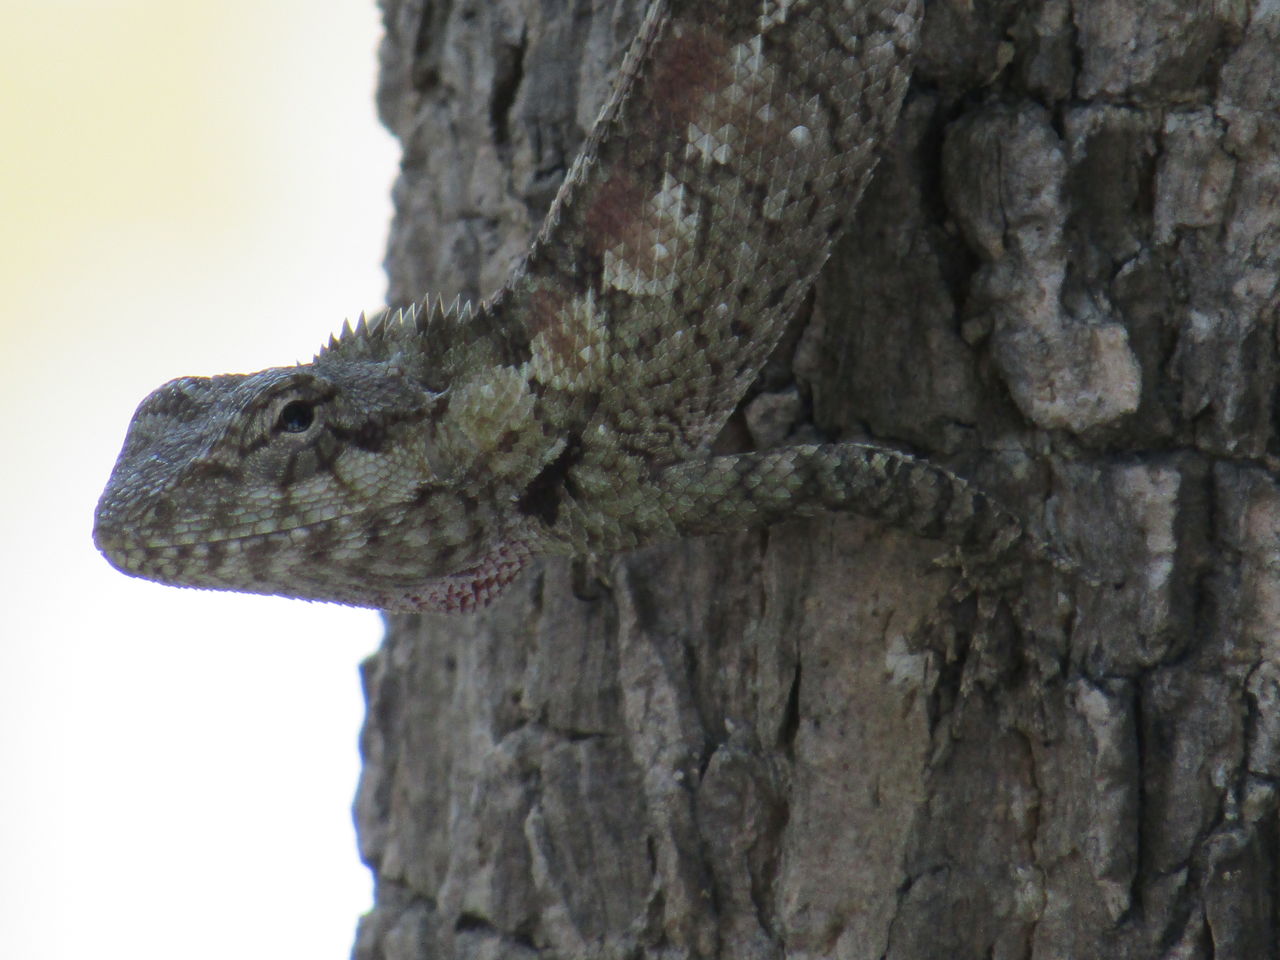 tree, animal themes, one animal, tree trunk, trunk, nature, no people, animal, animal wildlife, close-up, textured, lizard, reptile, wildlife, plant, branch, day, wood, outdoors, animal body part, focus on foreground, rough